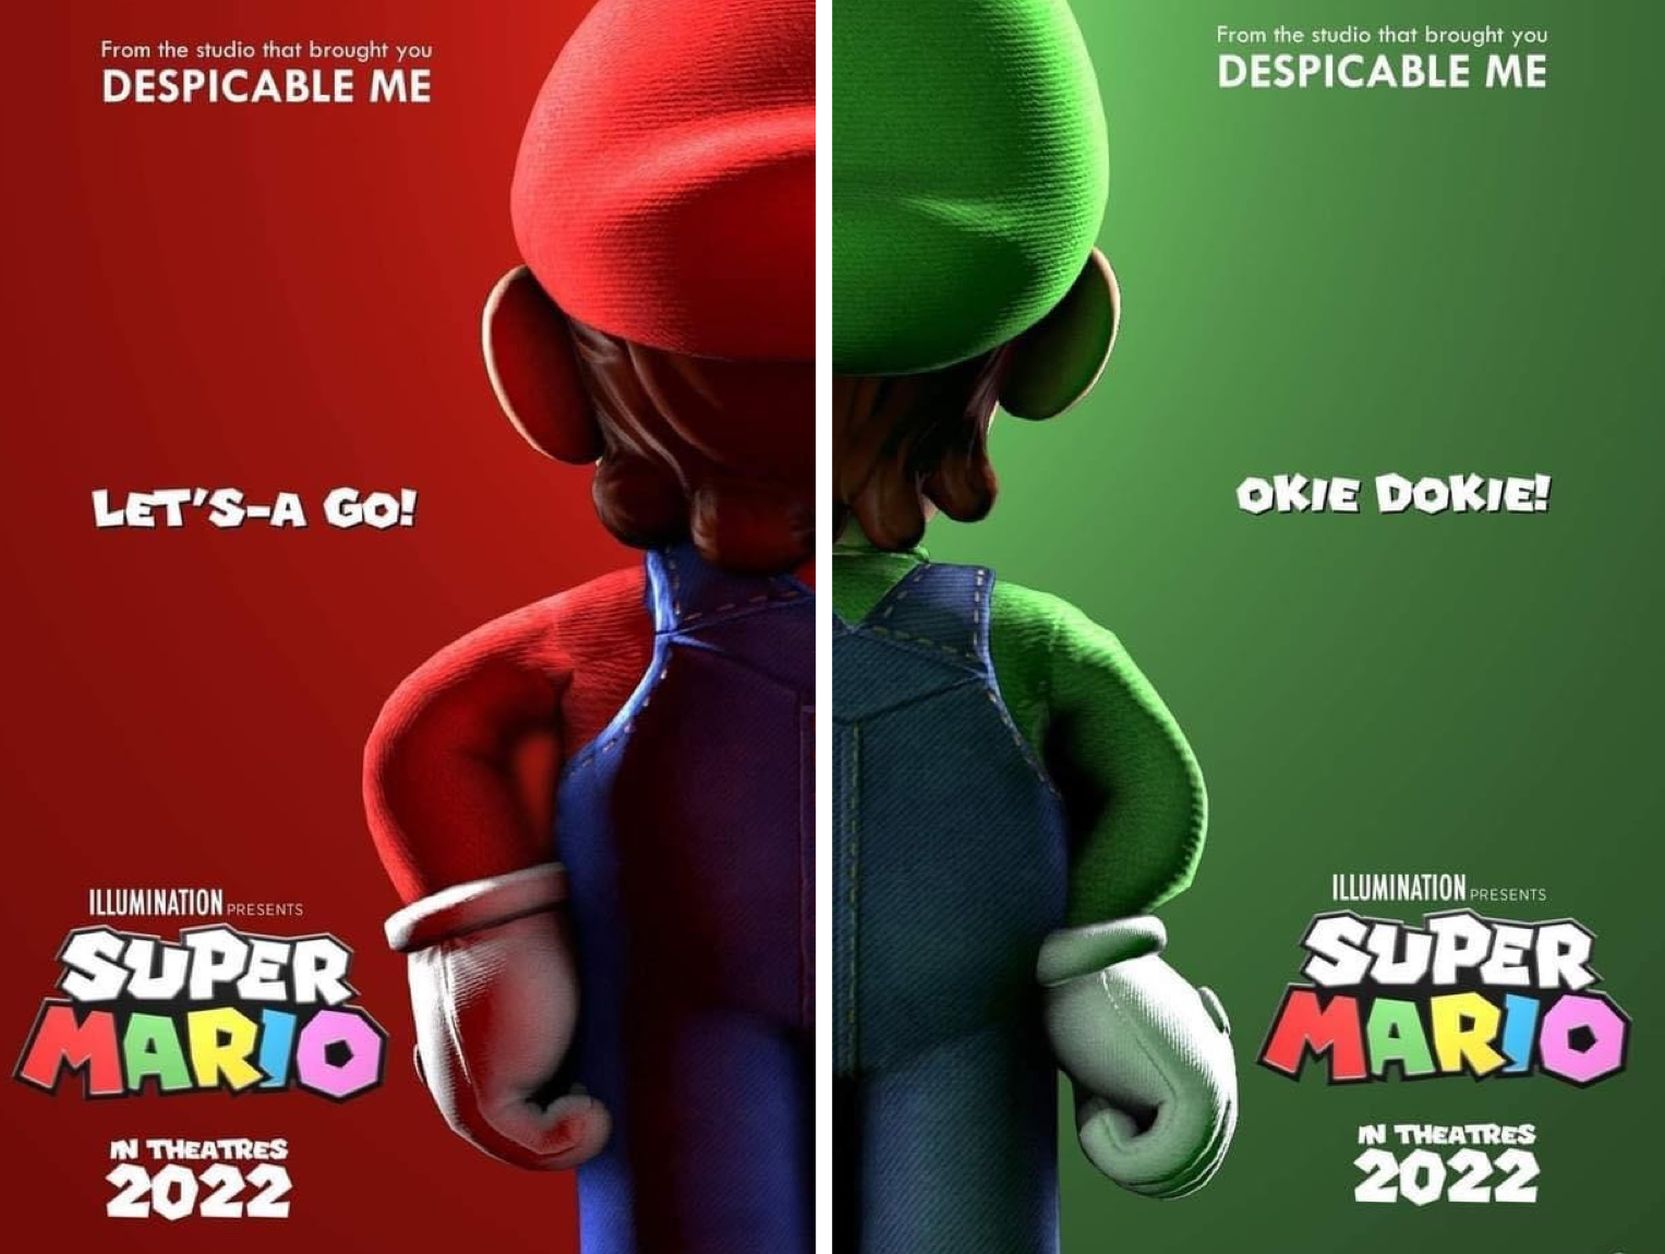 Image for Watch the world premiere trailer for the Super Mario Bros. movie here